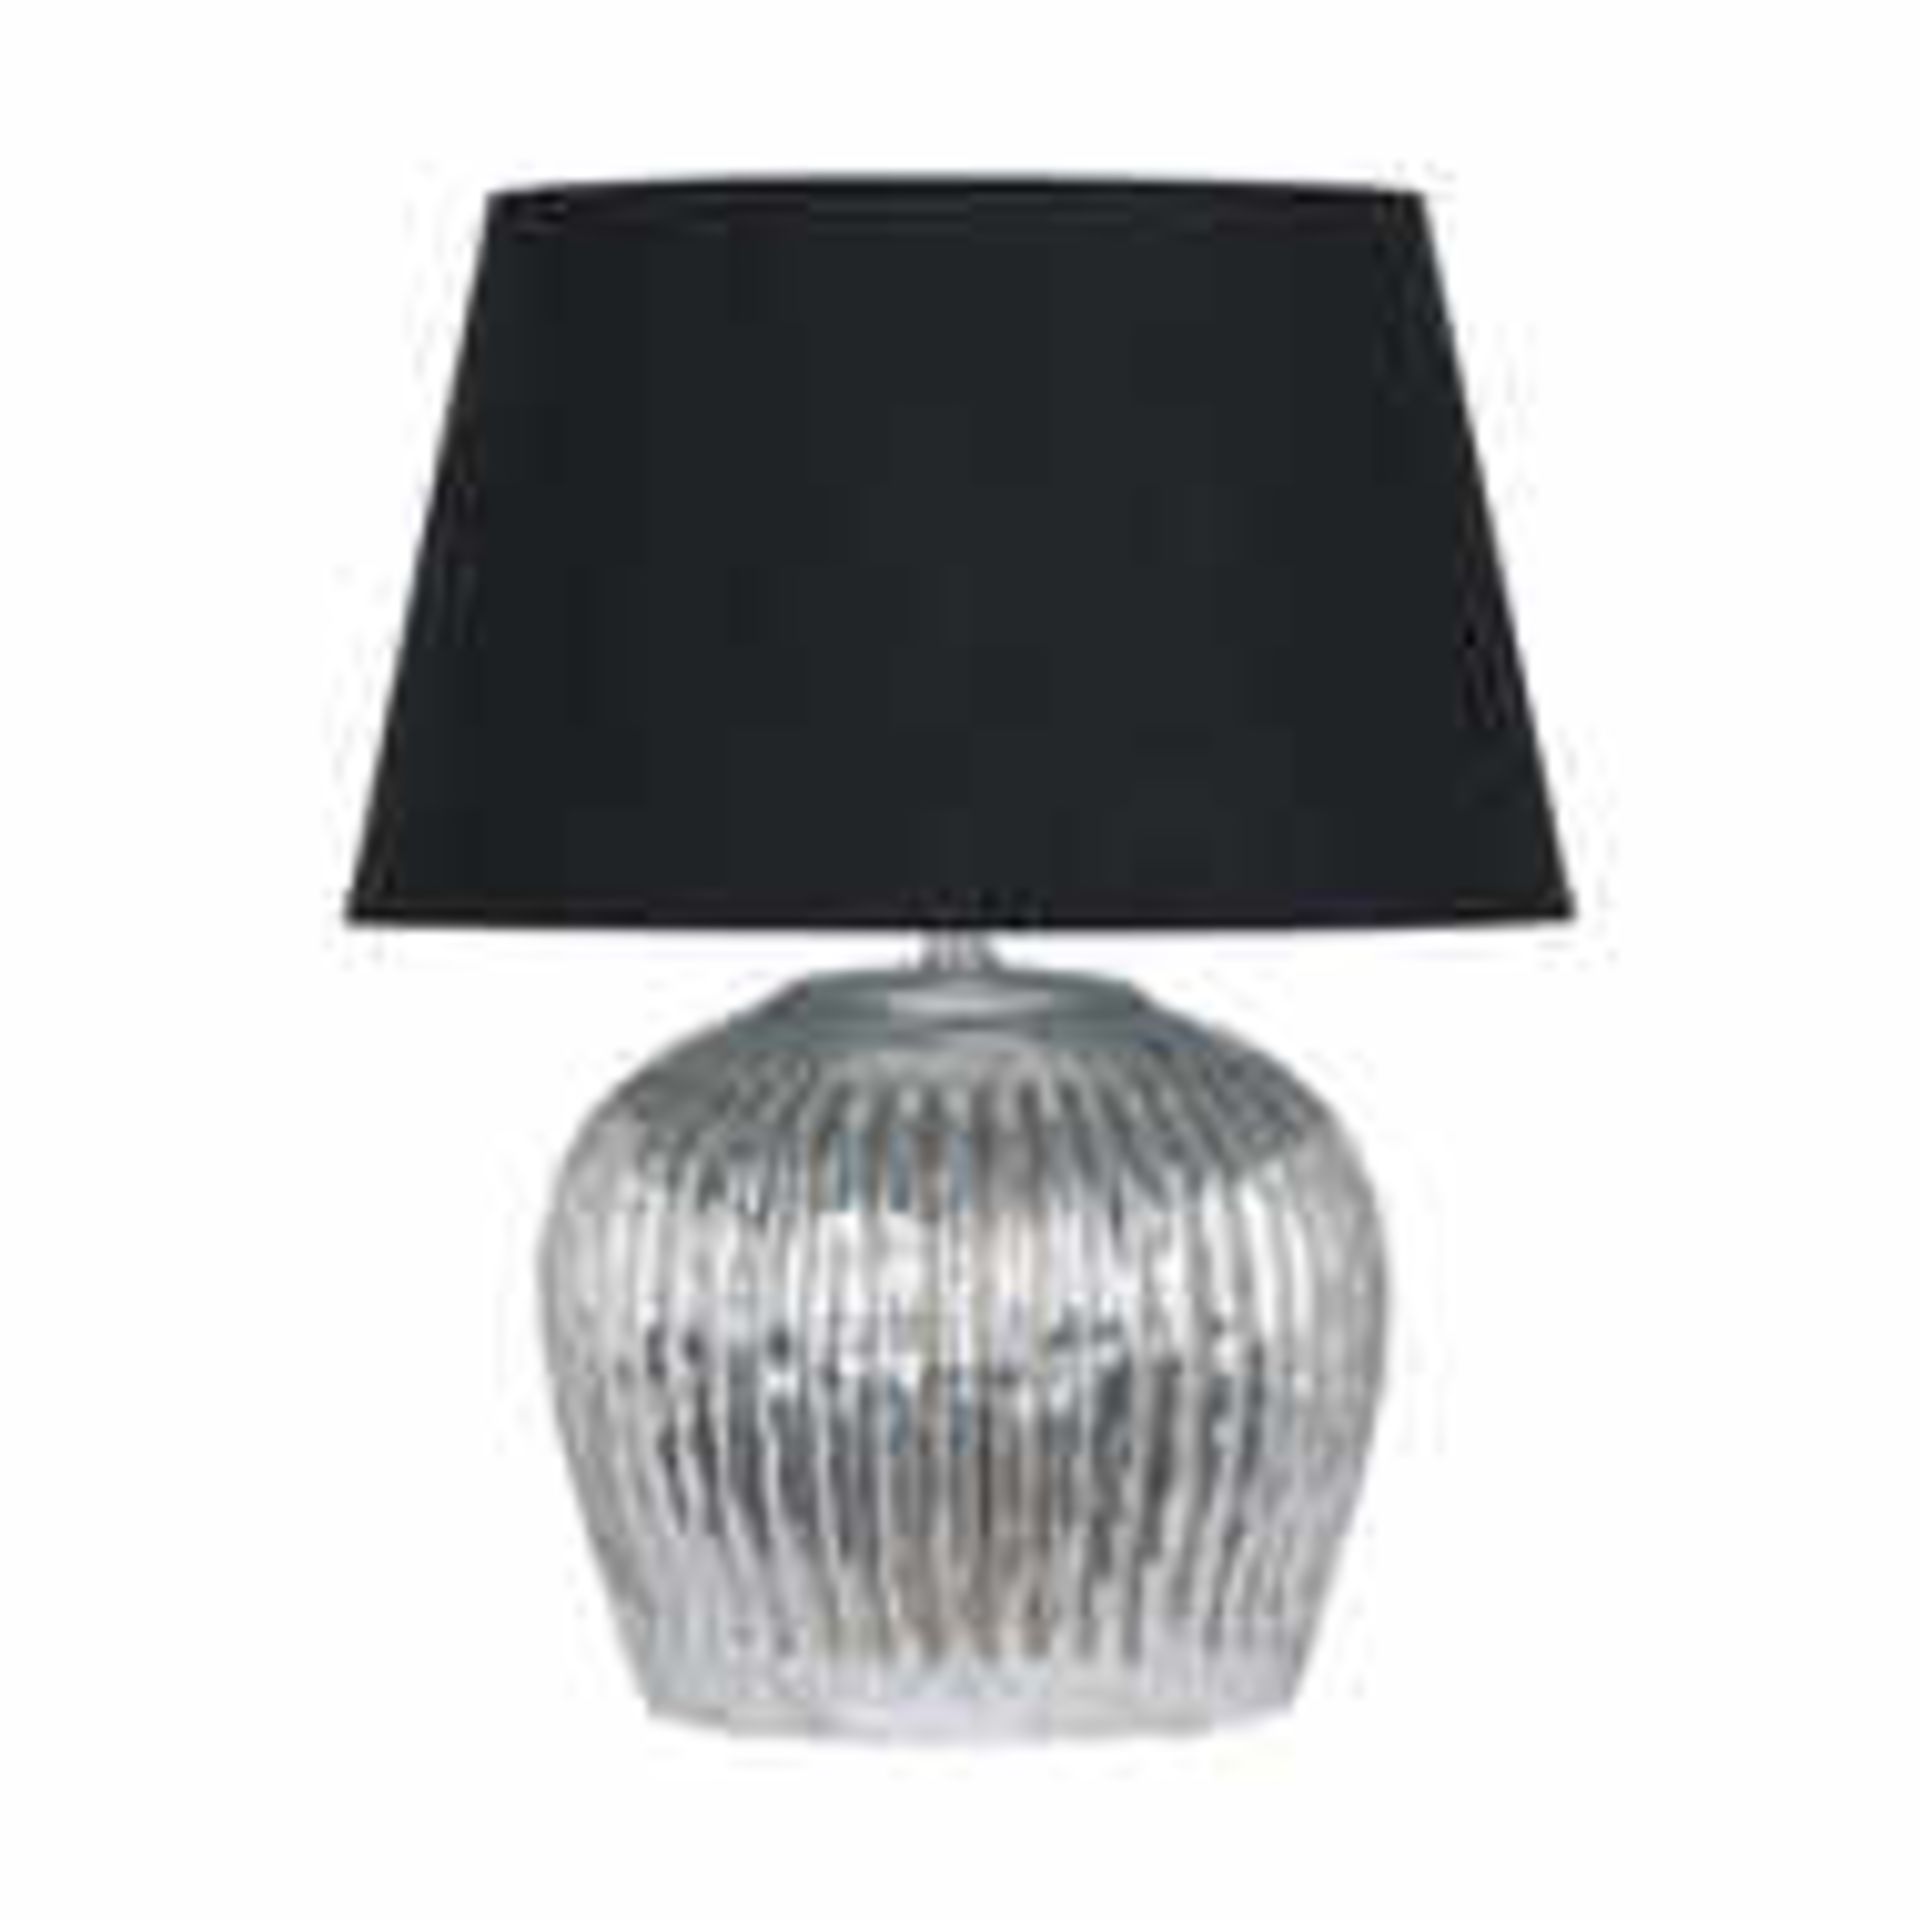 A Pair of Olivia Silver Ceramic Table Lamp Ceramic Bases And Complemented By Its Elegant Shape And - Image 2 of 2